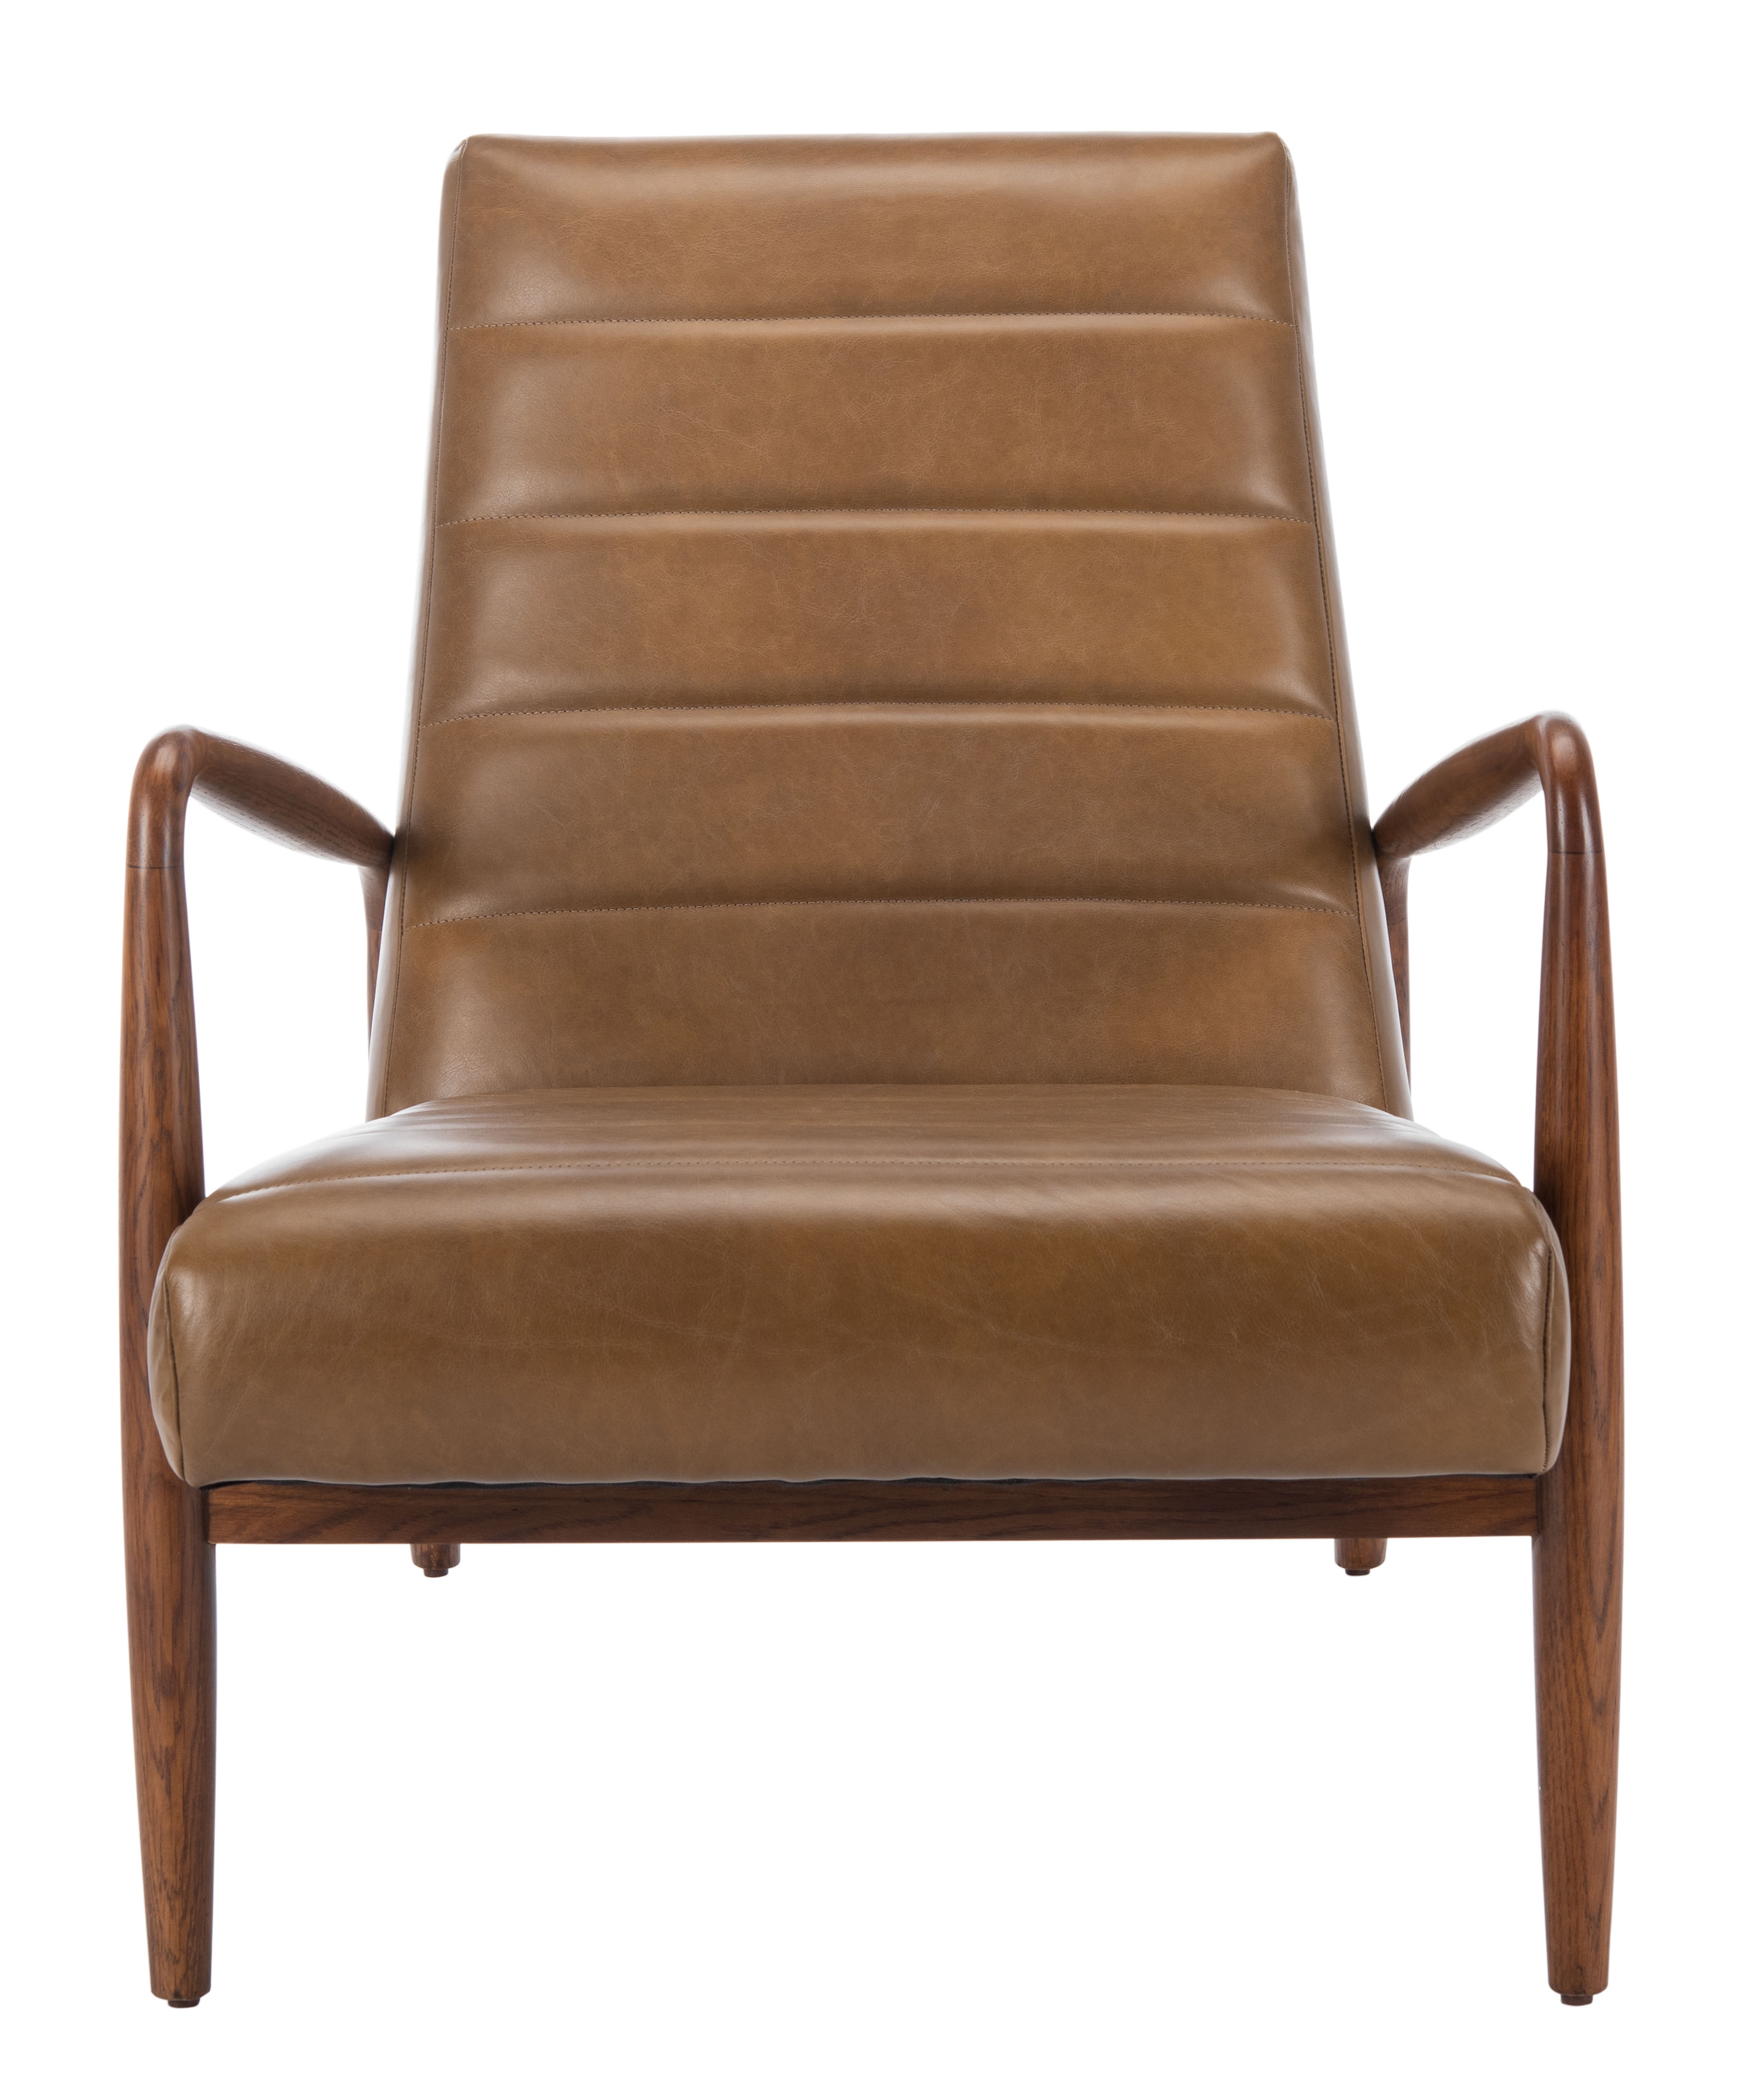 Willow Channel Tufted Arm Chair - Gingerbread/Dark Walnut  - Arlo Home - Image 1